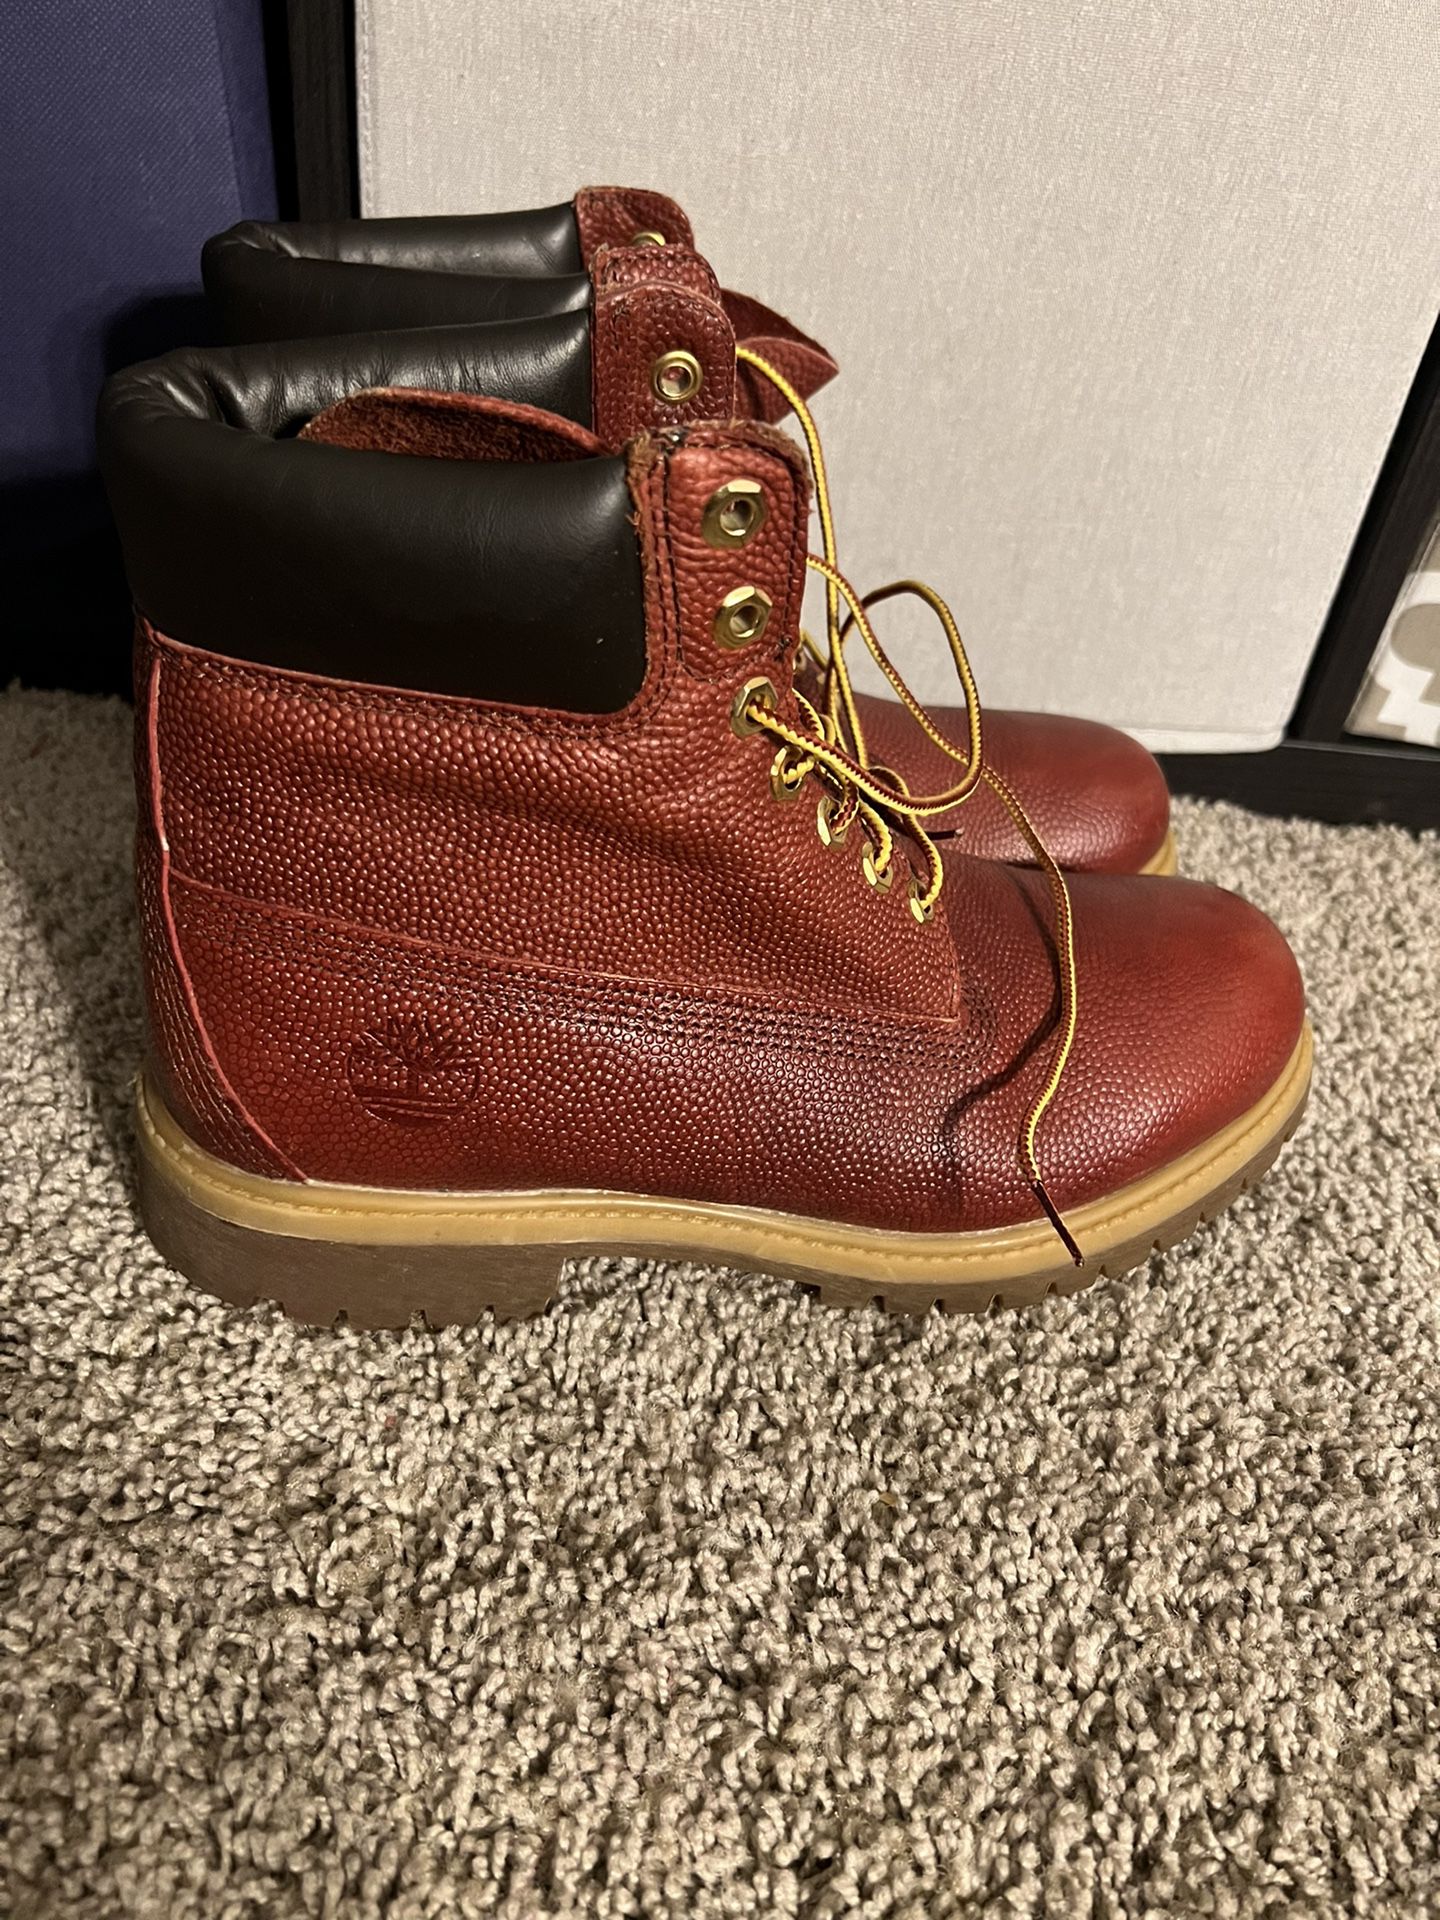 Timberland 6" Boot Football Leather Brown boots size 8.5